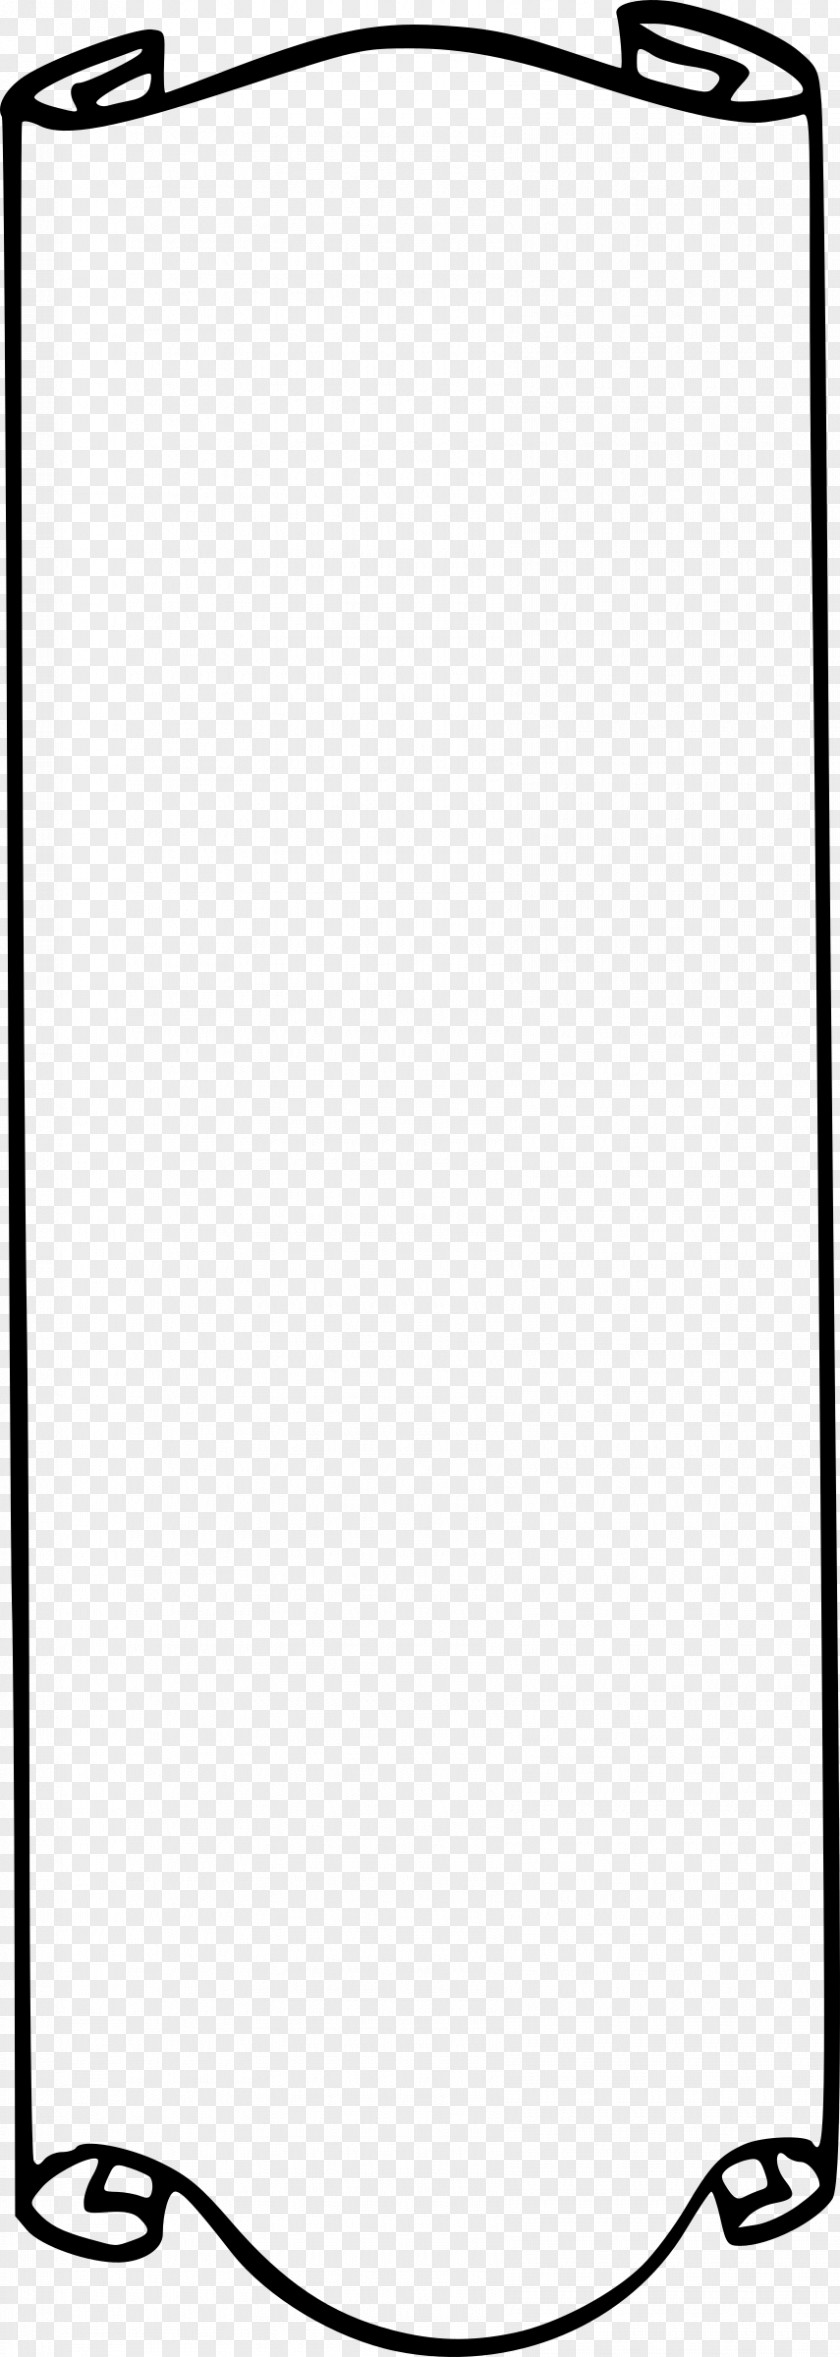 Page Picture Frames Black And White Clip Art PNG